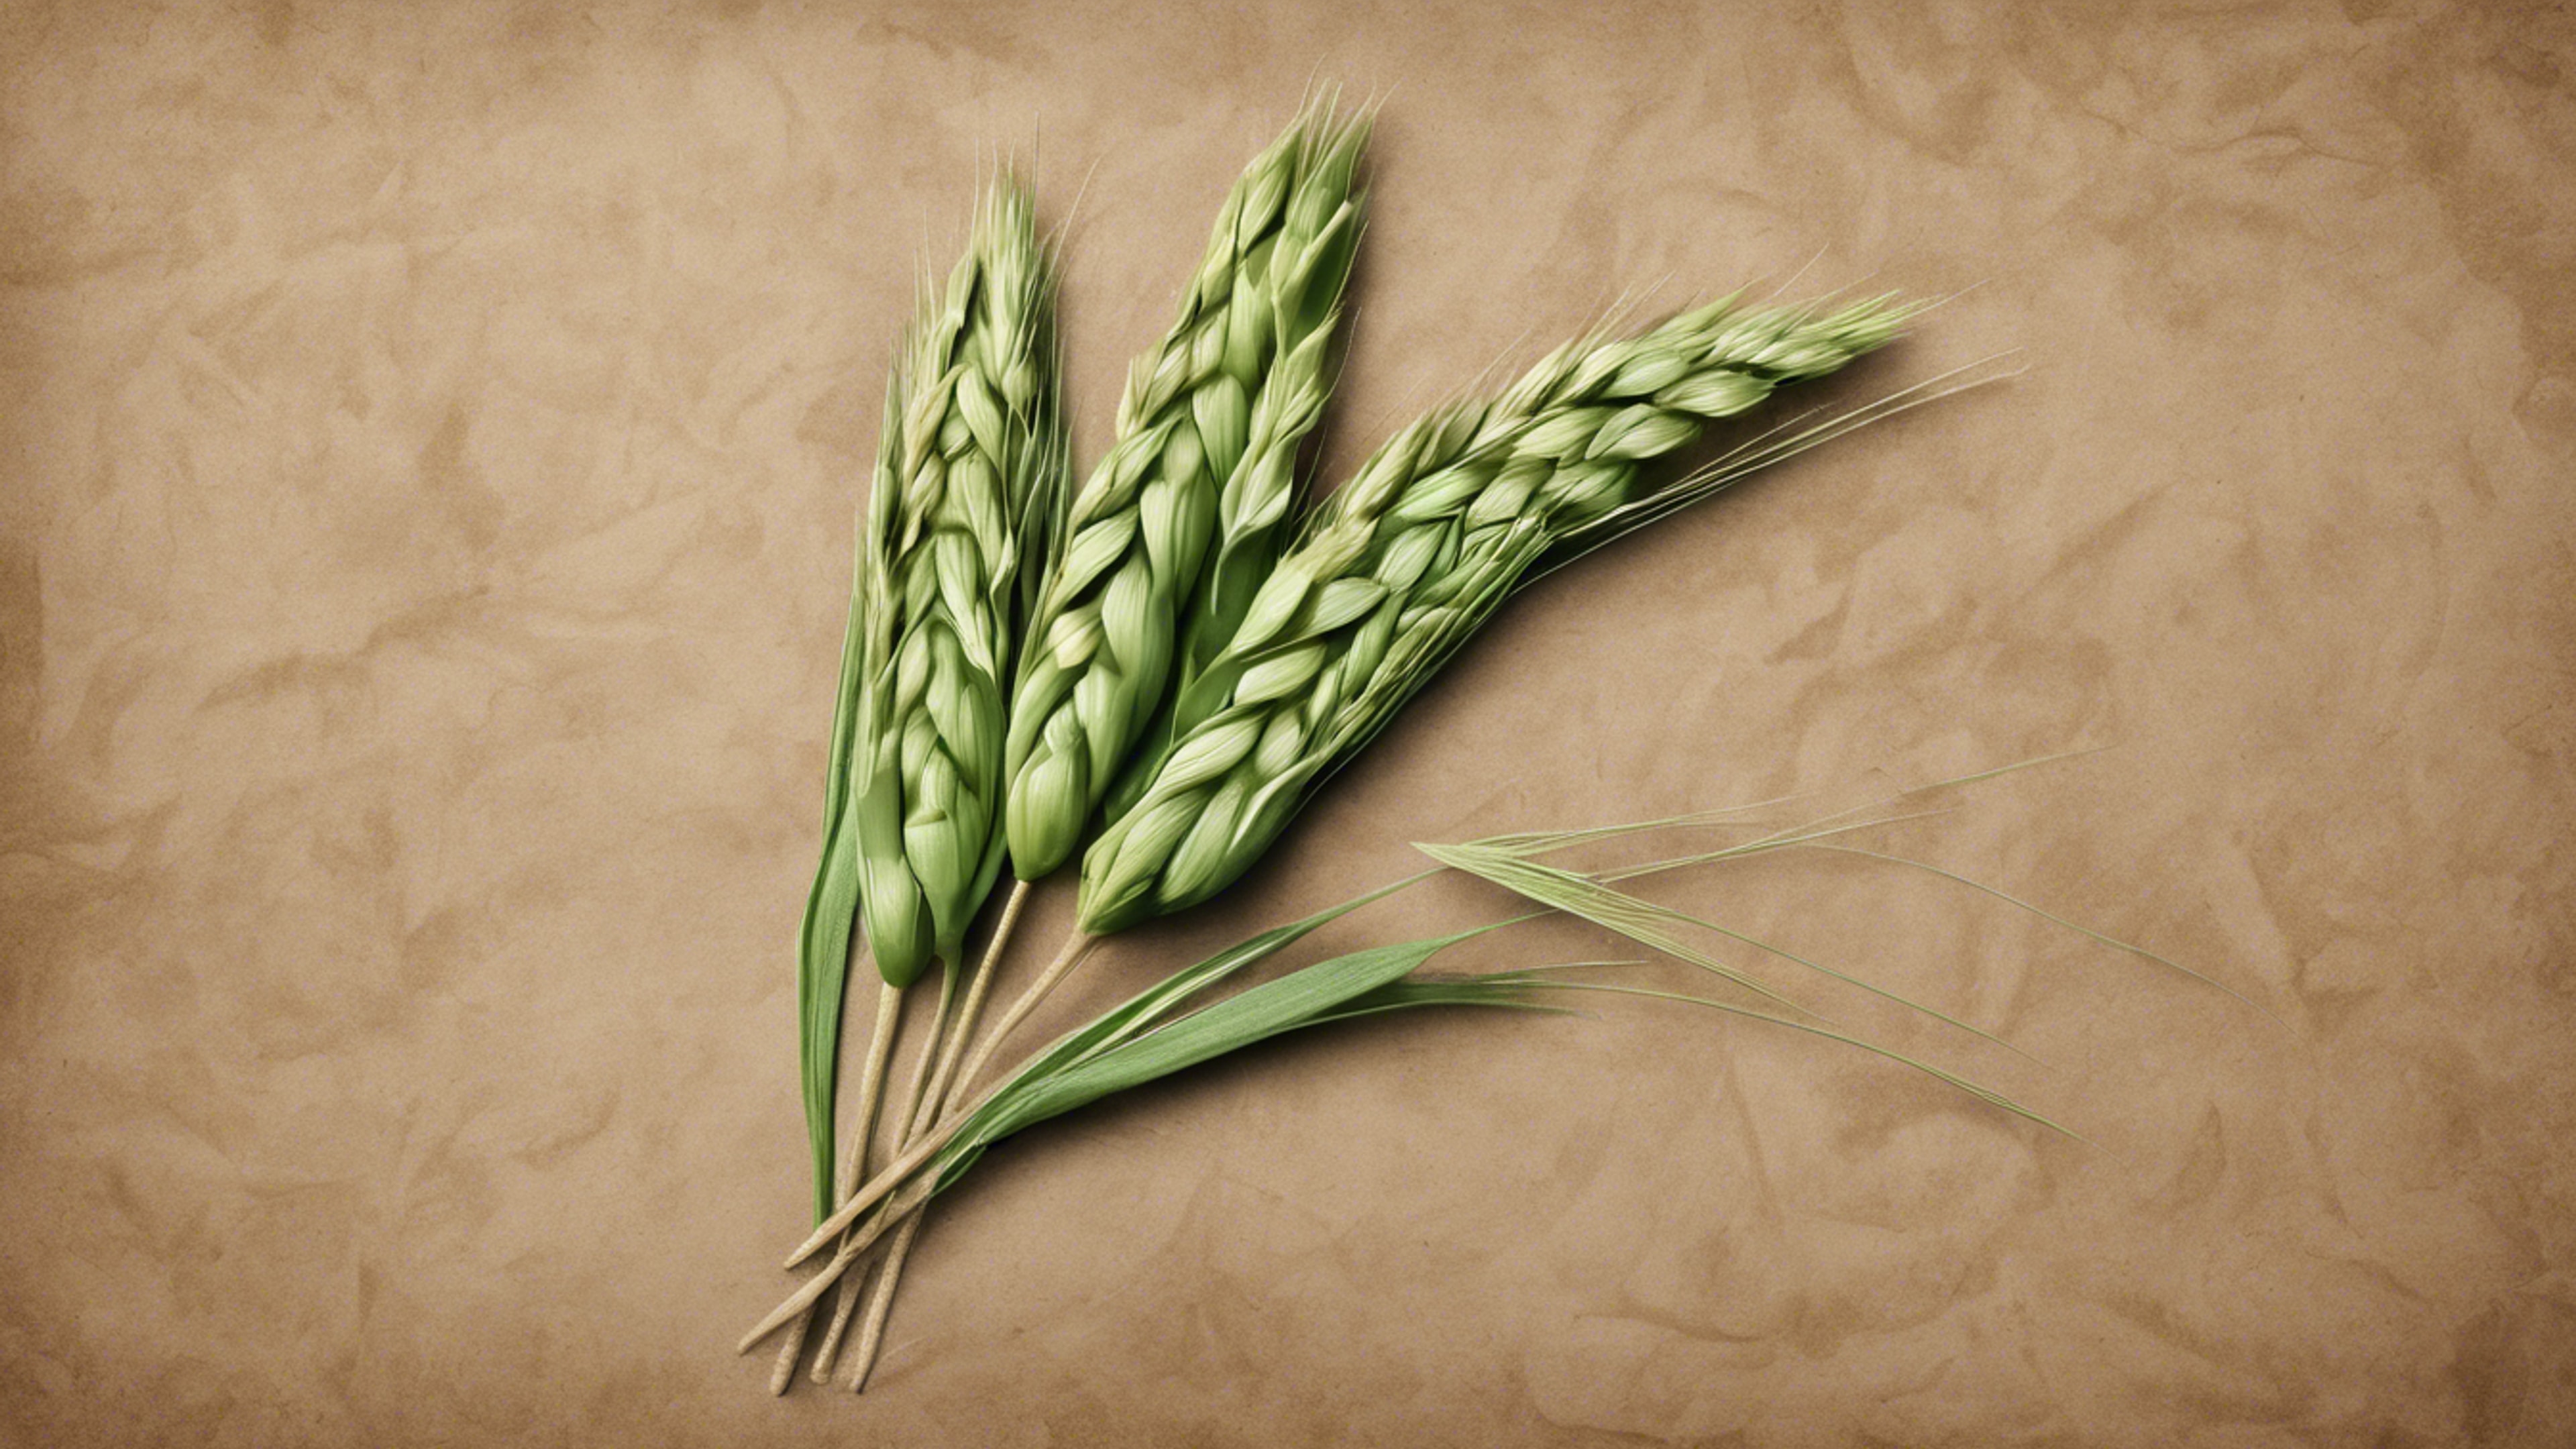 A detailed botanical illustration of a stalk of green wheat against an aged brown paper background. Дэлгэцийн зураг[958050ab552342b3bed0]